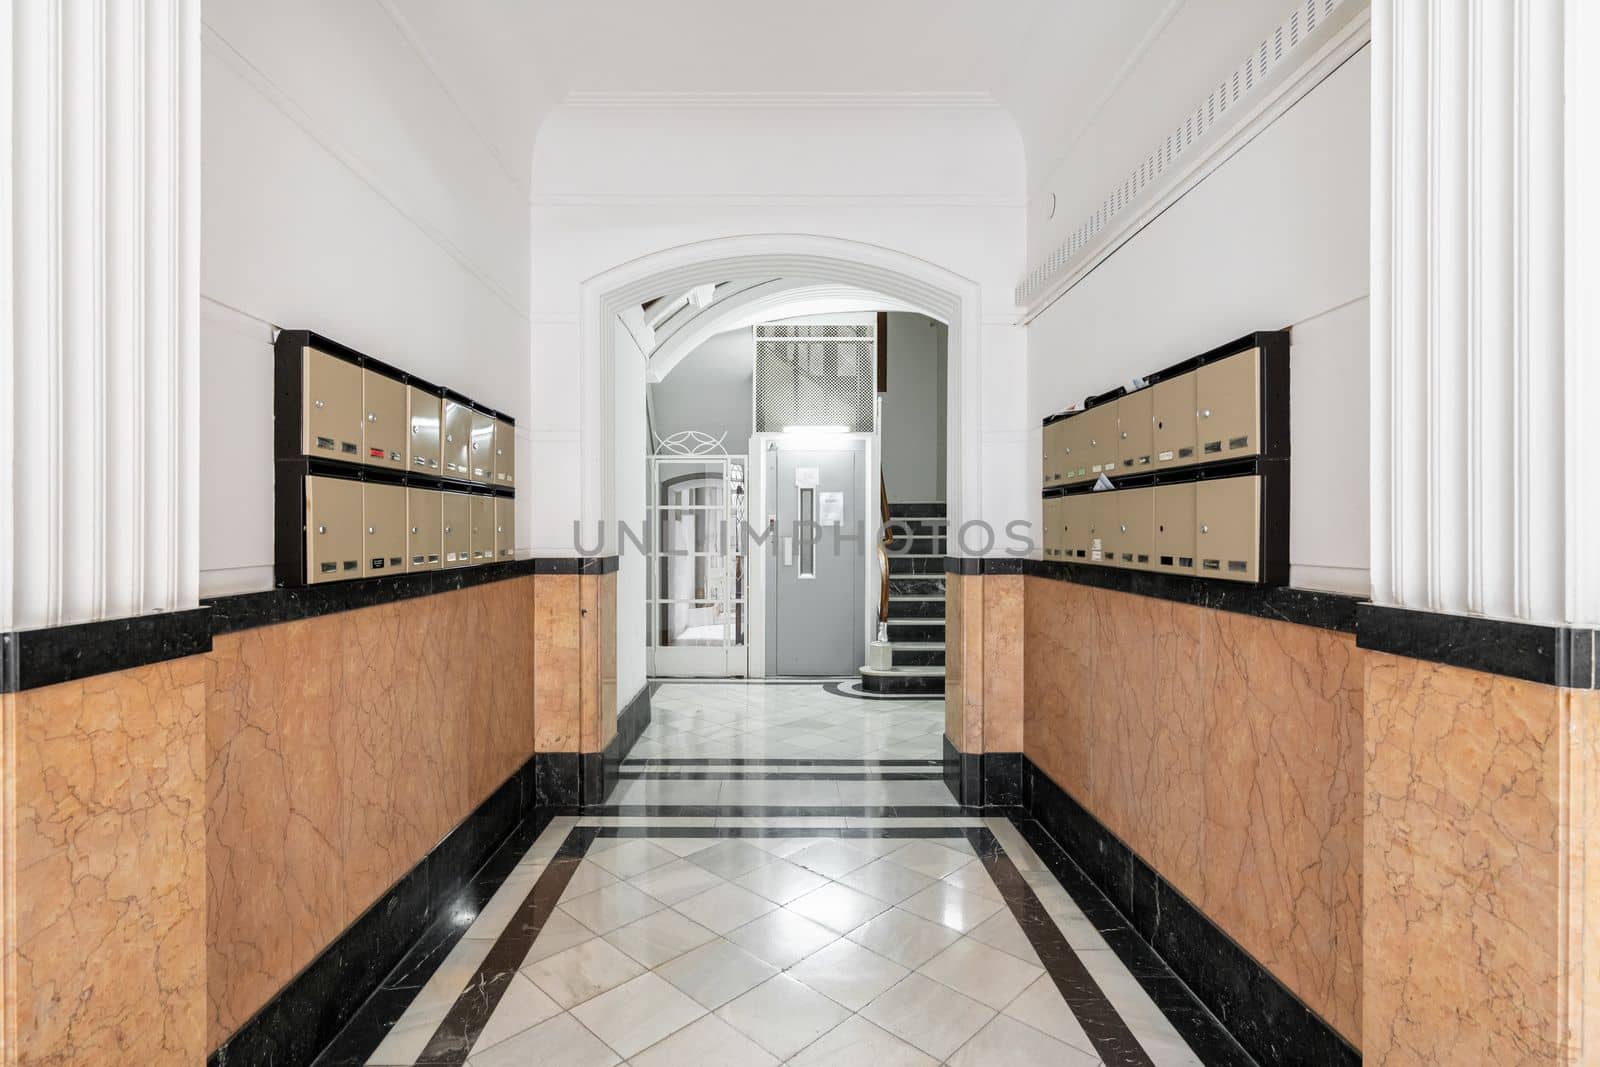 Long hall on the walls with orange marble tiles mailboxes on both sides for correspondence and letters. At the end of the hall there is a modern elevator to other floors and stairs. by apavlin